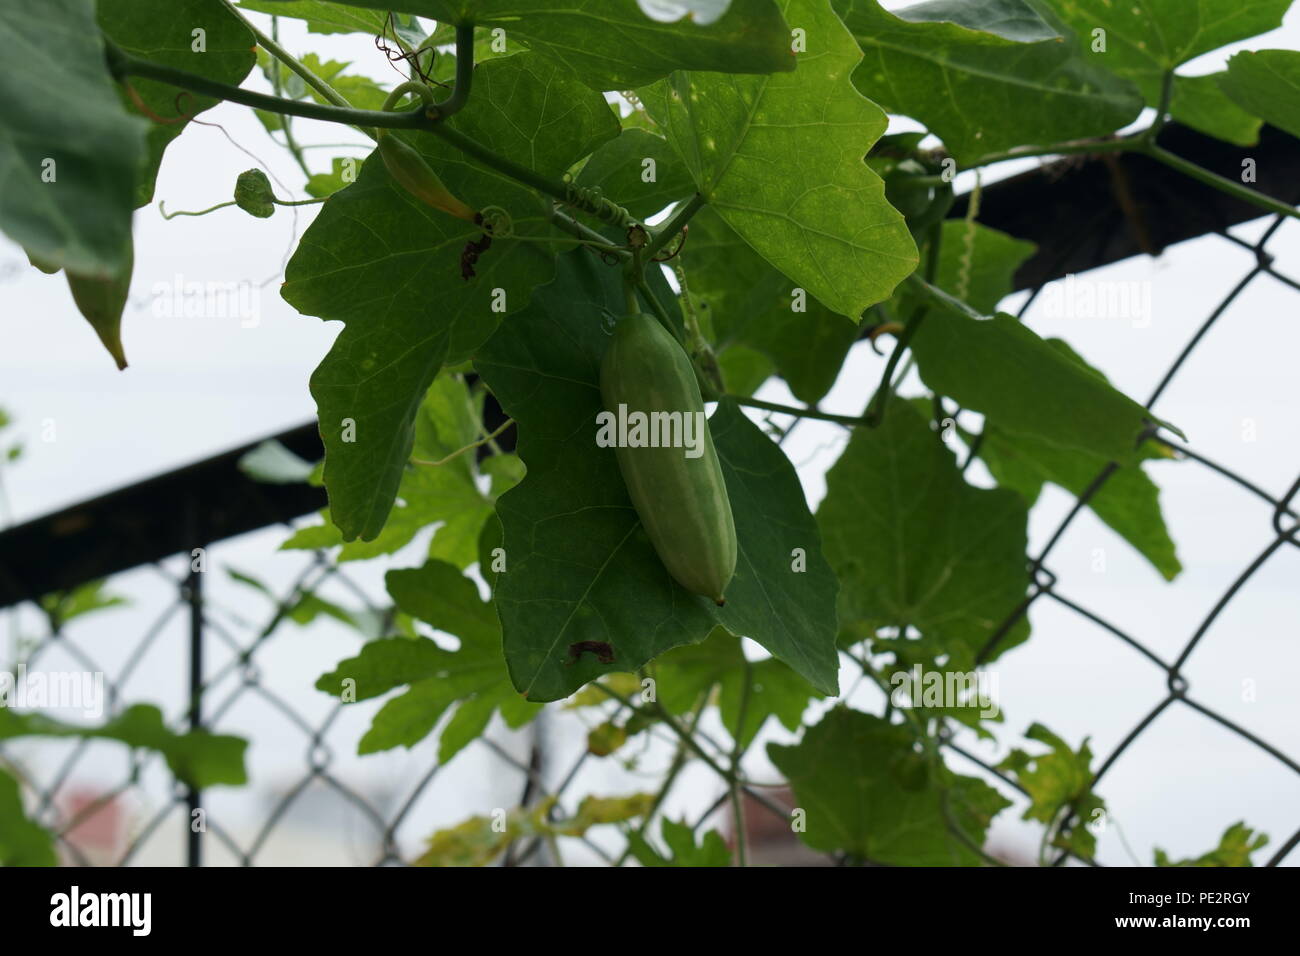 Ready to eat ivy gourd hanging from climber plant Stock Photo